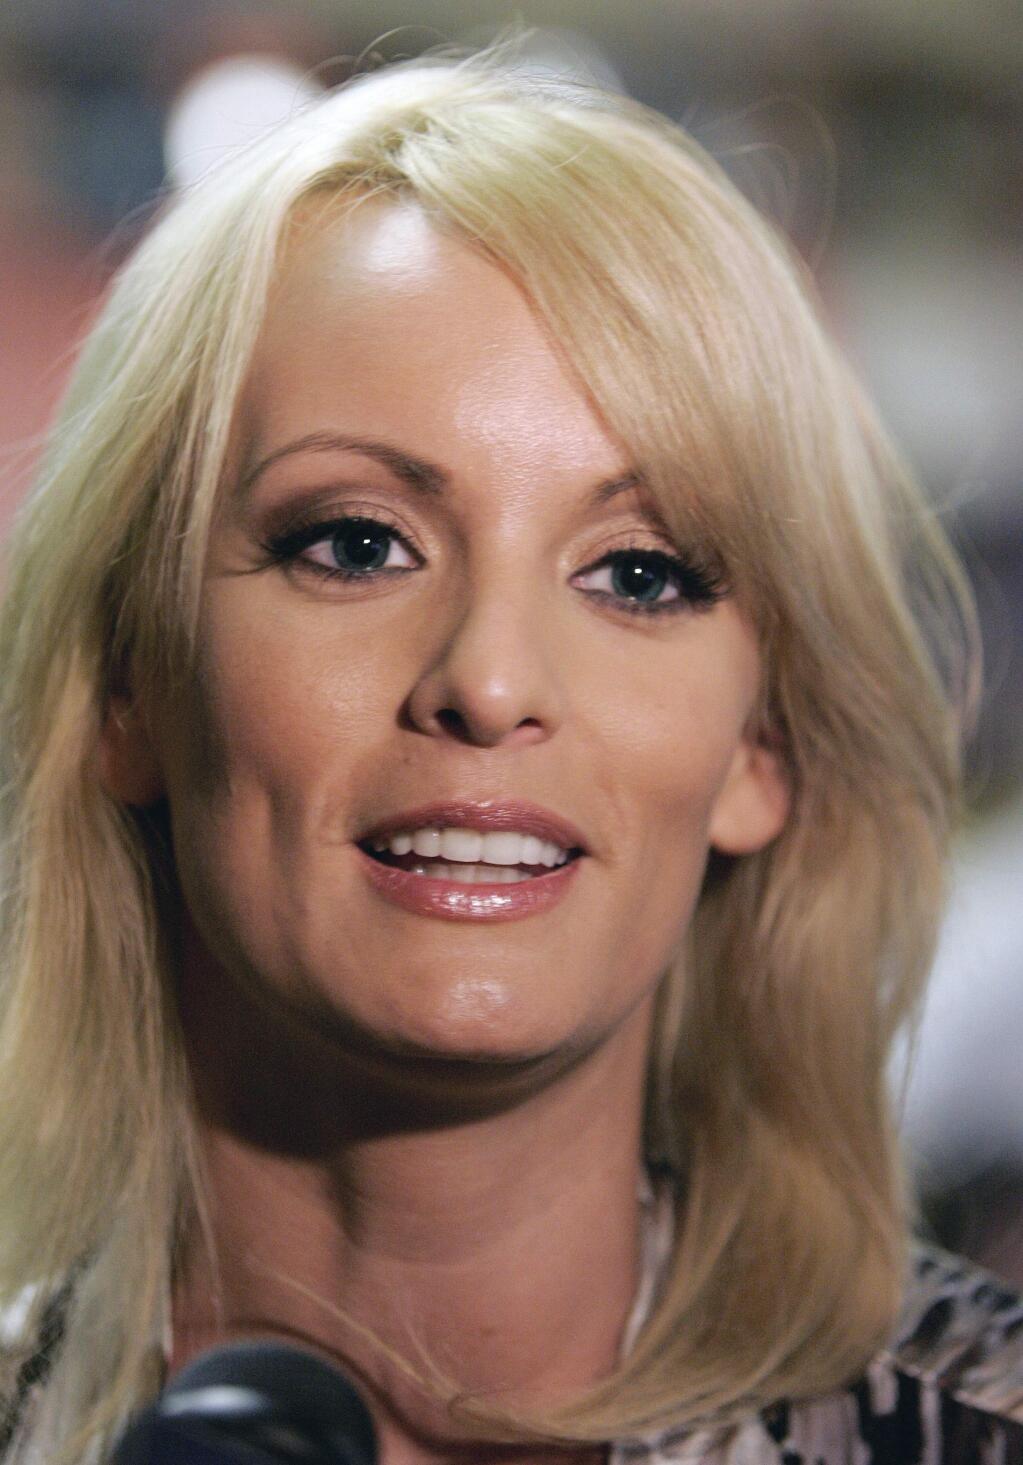 File- This May 6, 2009, file photo shows Stormy Daniels visiting a local restaurant in downtown New Orleans. A tabloid magazine held back from publishing Daniels' 2011 account of an alleged affair with Donald Trump after the future president's personal lawyer threatened to sue, four former employees of the tabloid's publisher told The Associated Press. (AP Photo/Bill Haber, File)